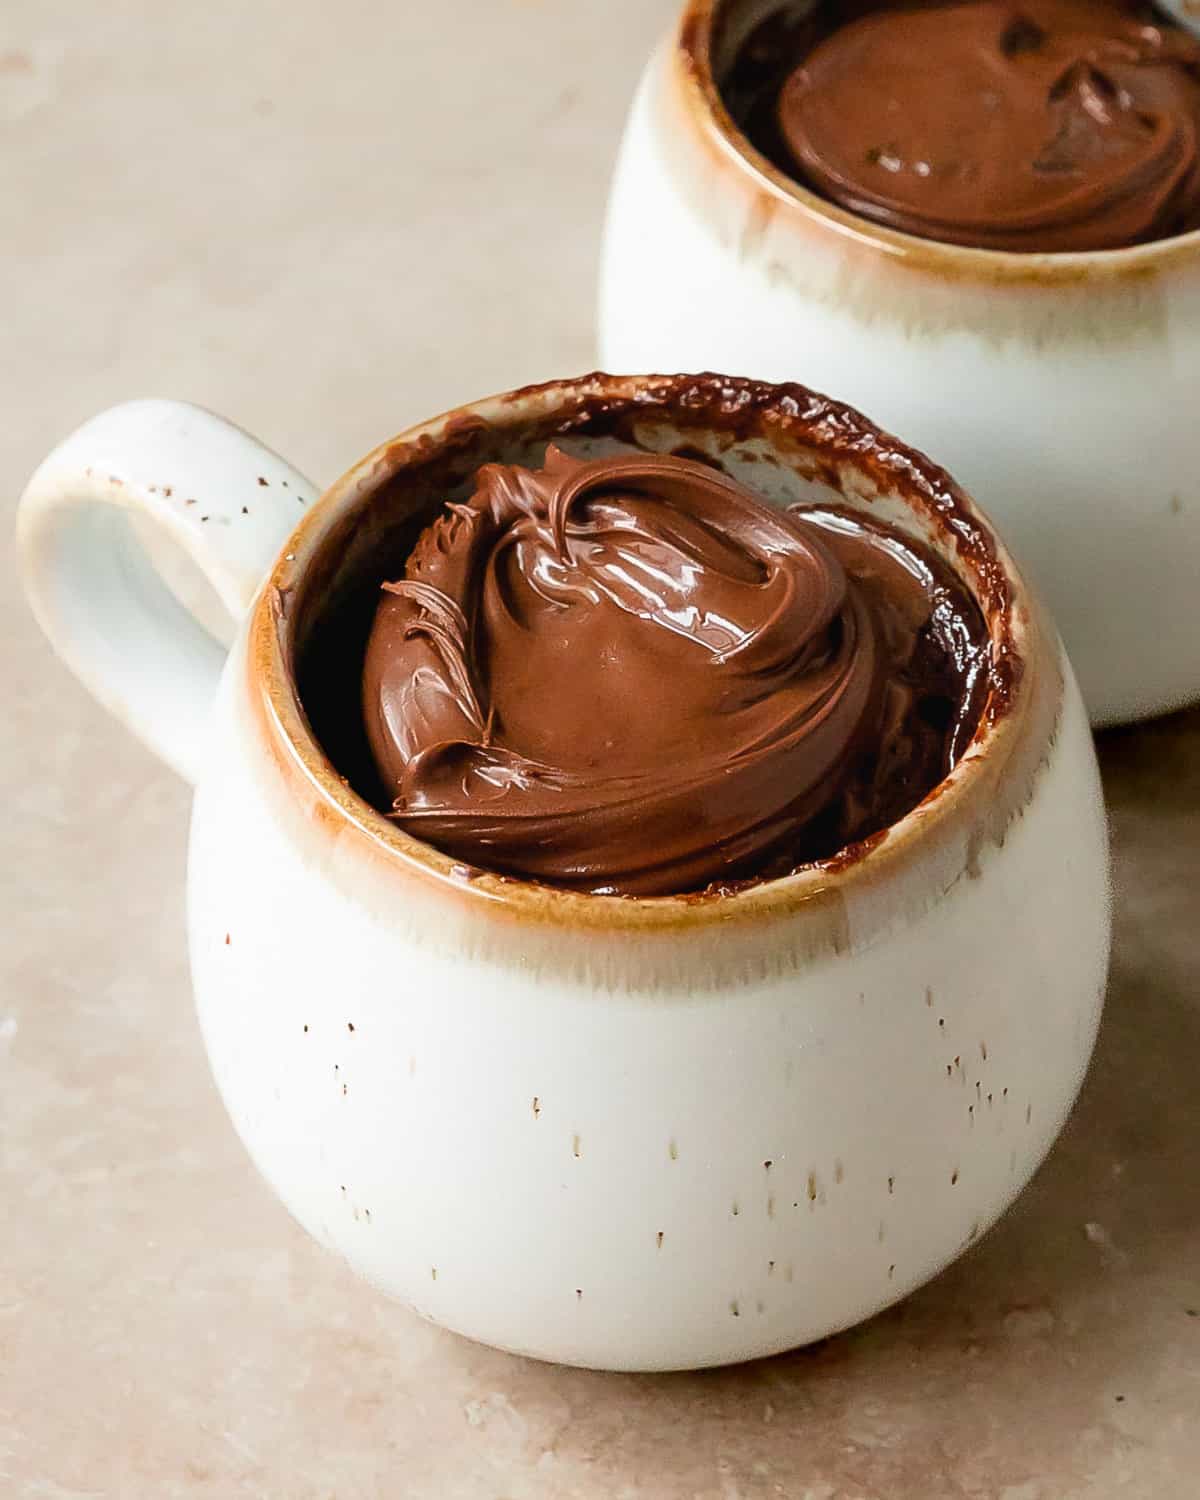 3 ingredient mug cake is a moist and fluffy 1 minute cake made in a a mug. This three ingredient mug cake is especially delicious when topped with your favorite topping such as Nutella or peanut butter. Make this cozy cake in a cup for the perfect single serve breakfast, snack or dessert. 